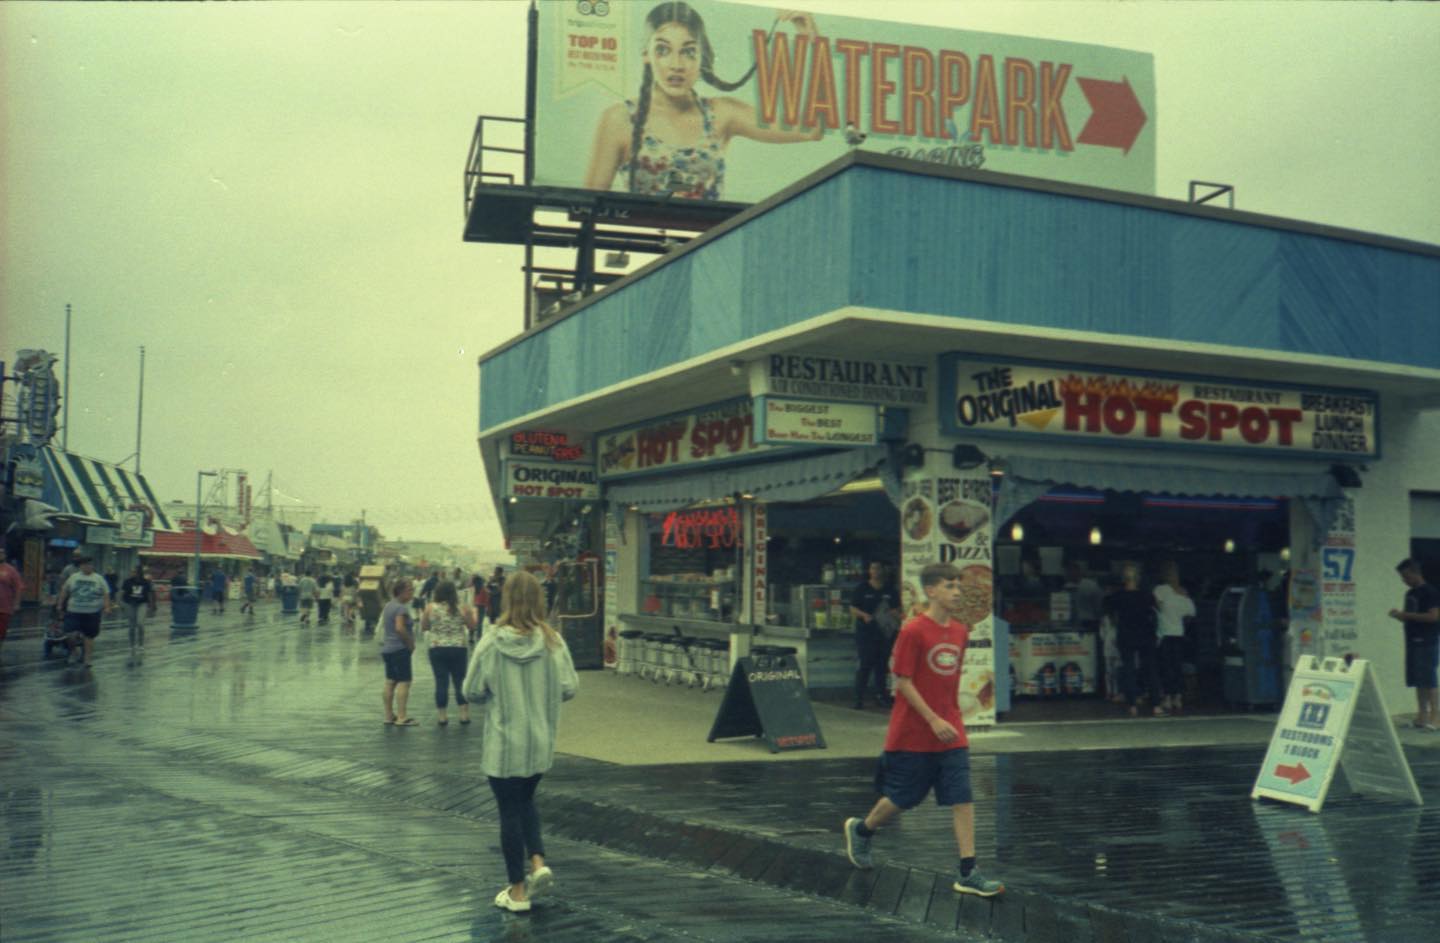 Waterpark-> The boardwalk in Wildwood last summer. Shot on Shur-Fine 200, which was a sticker over a canister that said Kirkland 200, which is probably some kind of color film made by Agfa.

#olympusxa #35mm #35mmfilm #film #filmphotography #staybrokeshootfilm